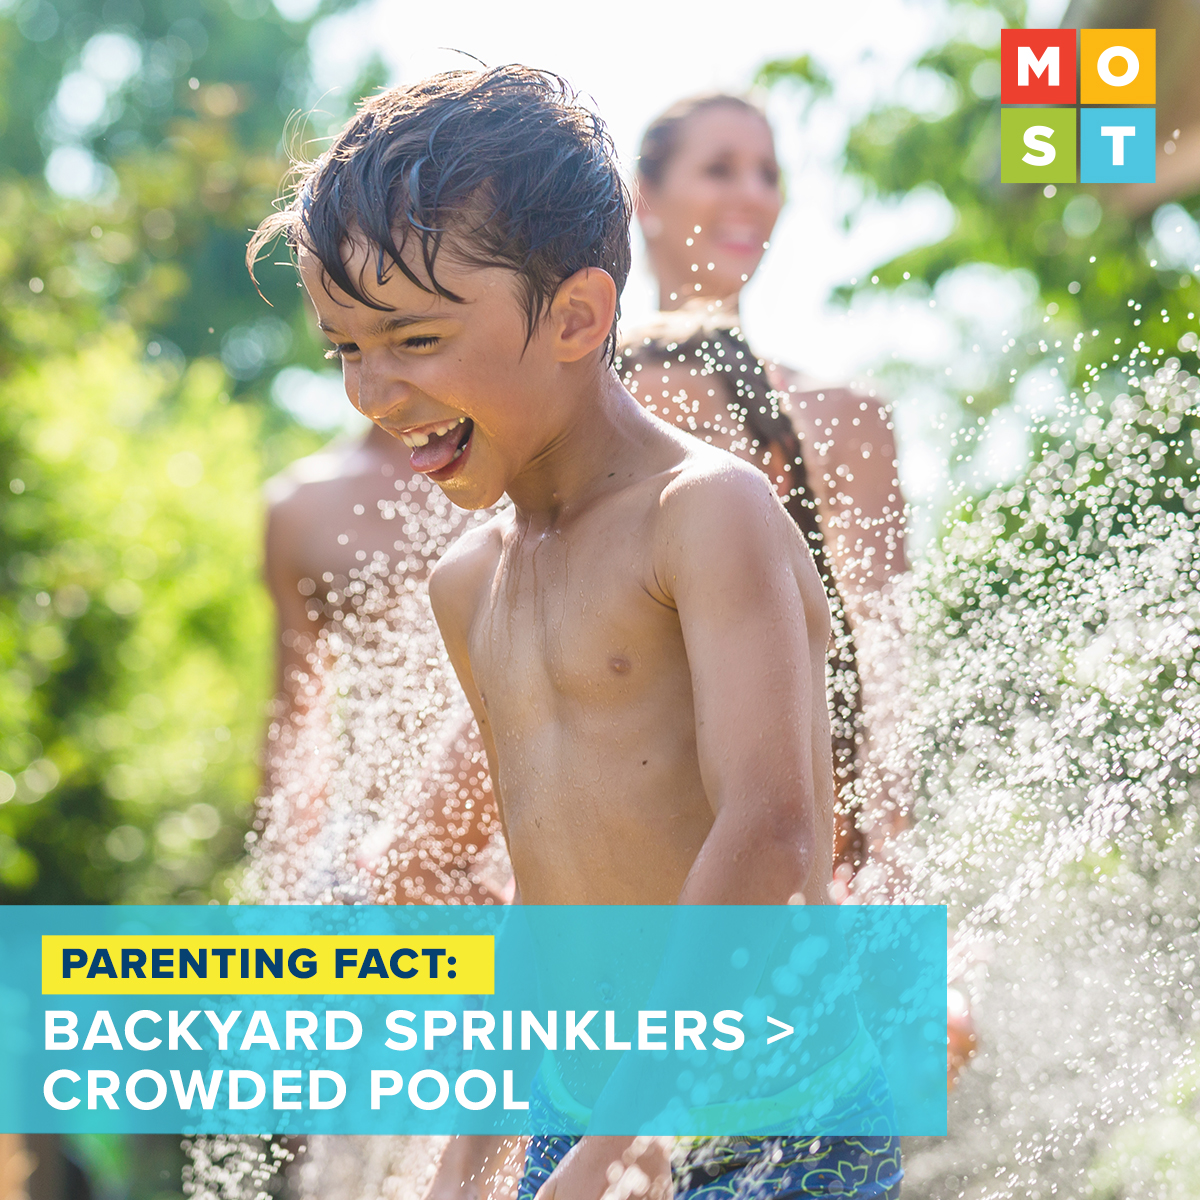 Sprinklers and saving with a MOST 529 have more in common than you think. They’re both simple ways to put your mind at ease while letting kids just be kids. Learn more at missourimost.org/home/tools/ben…